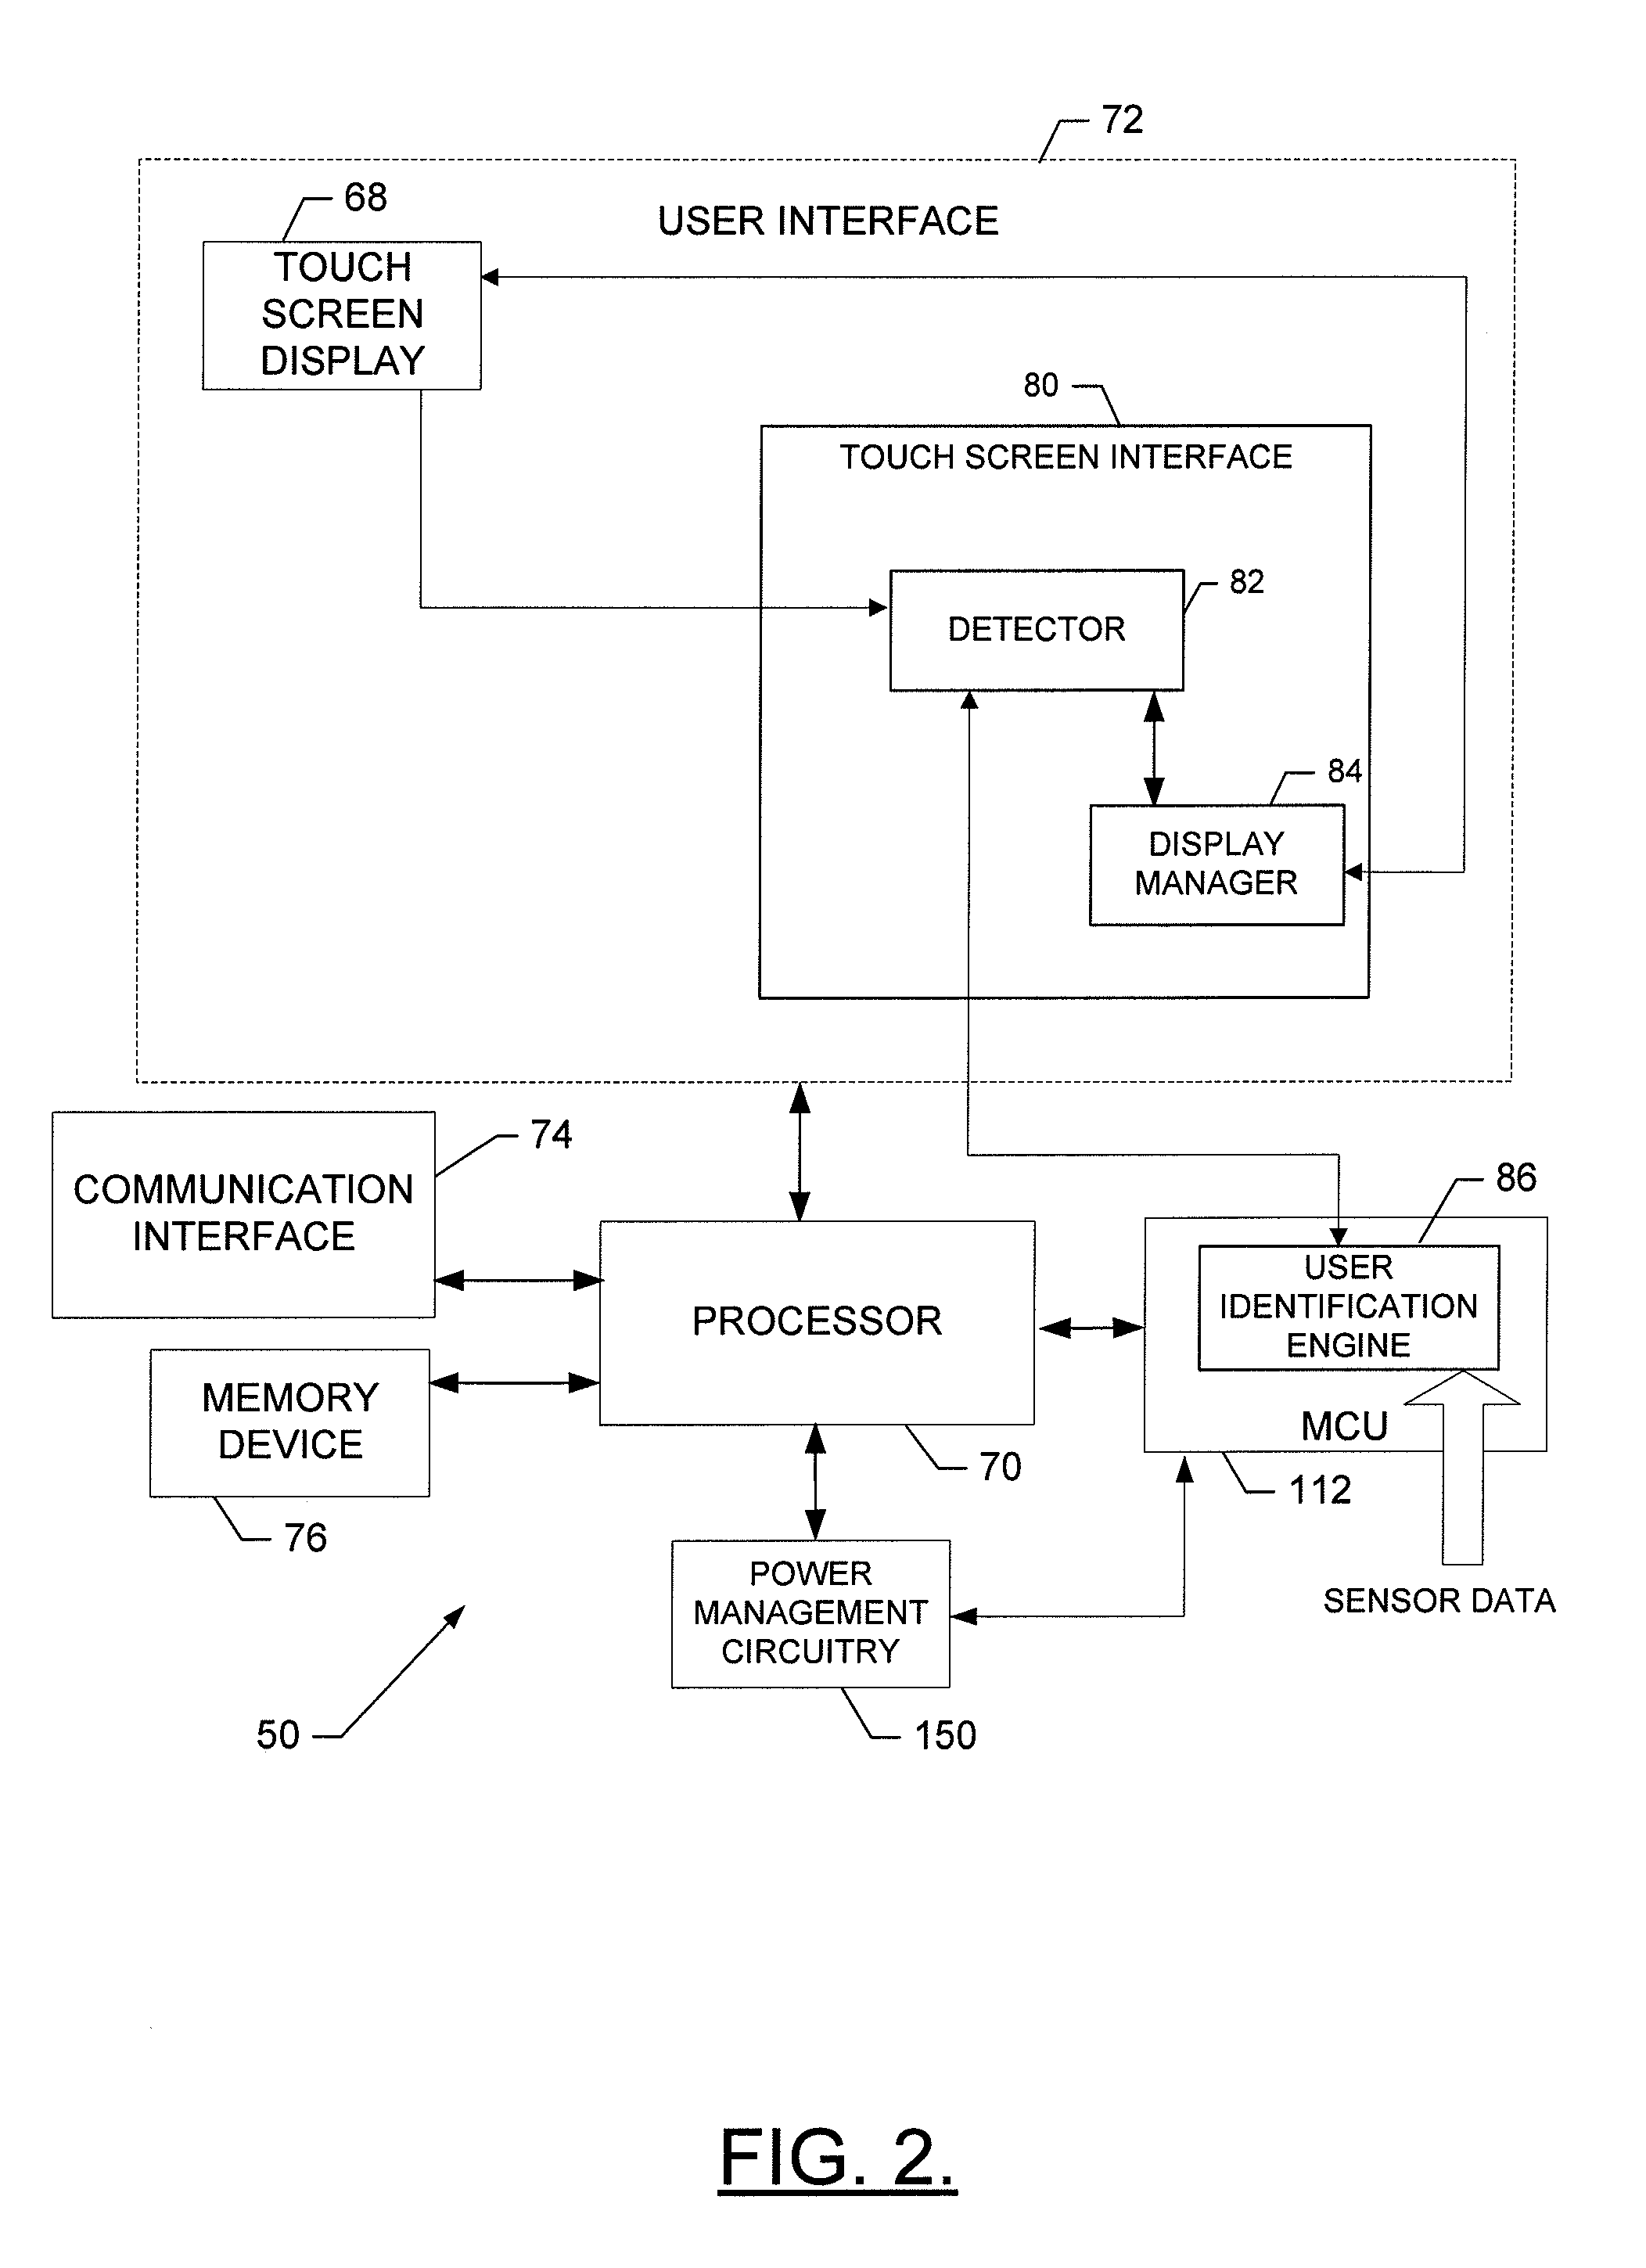 Method and apparatus for providing passive user identification